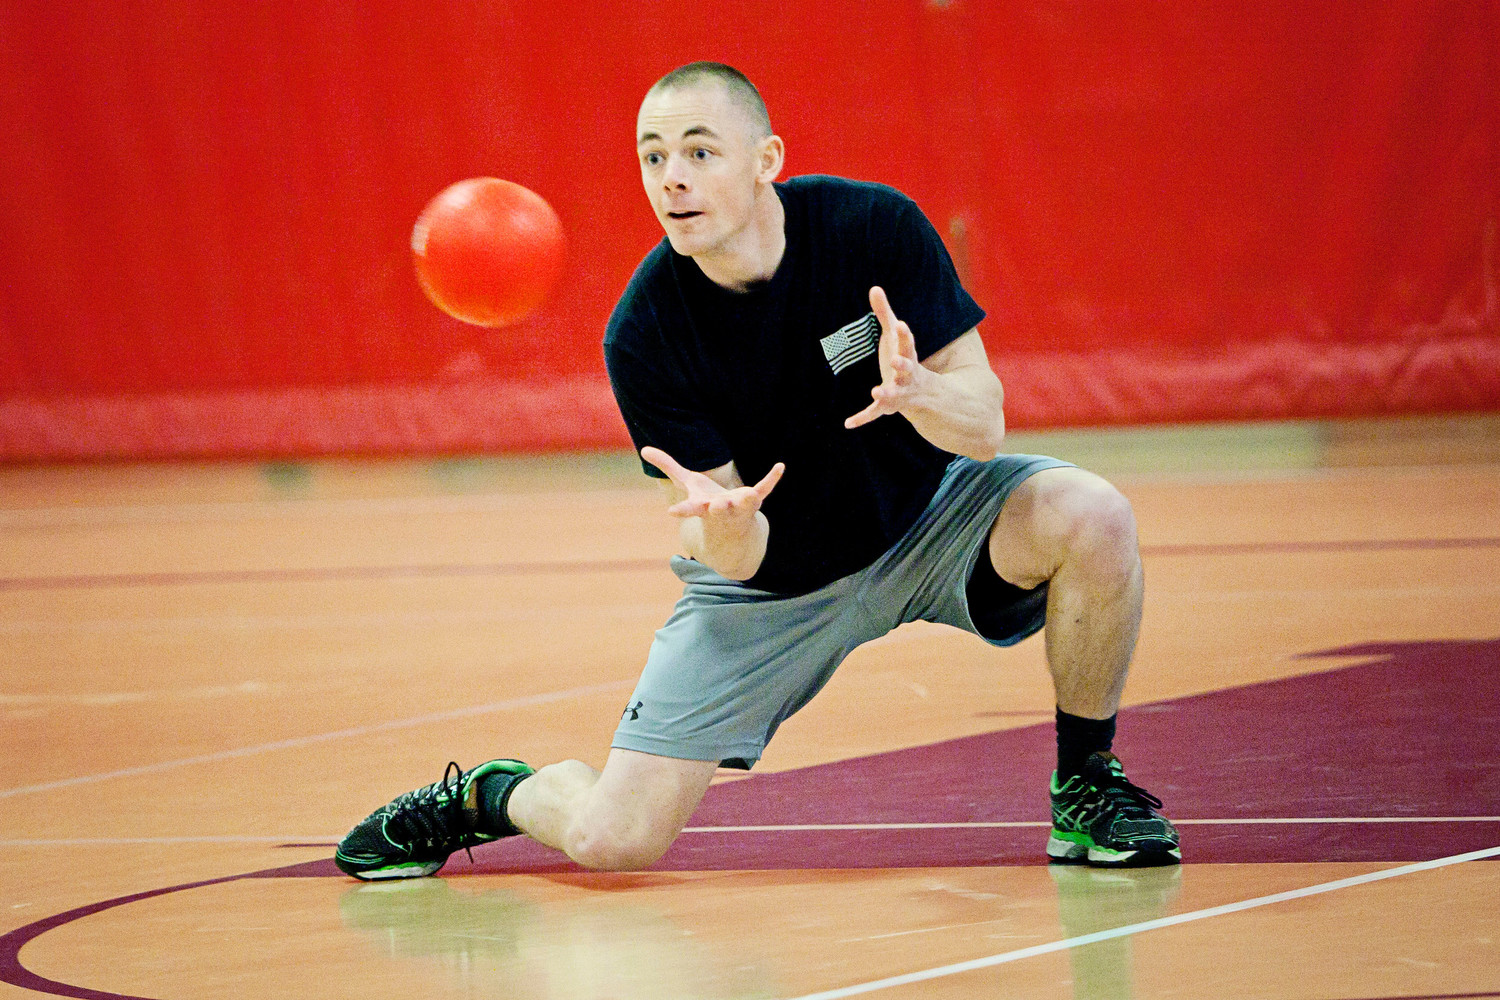 Portsmouth Police Officer Michael Quinn of the Night Watch team makes an easy catch.